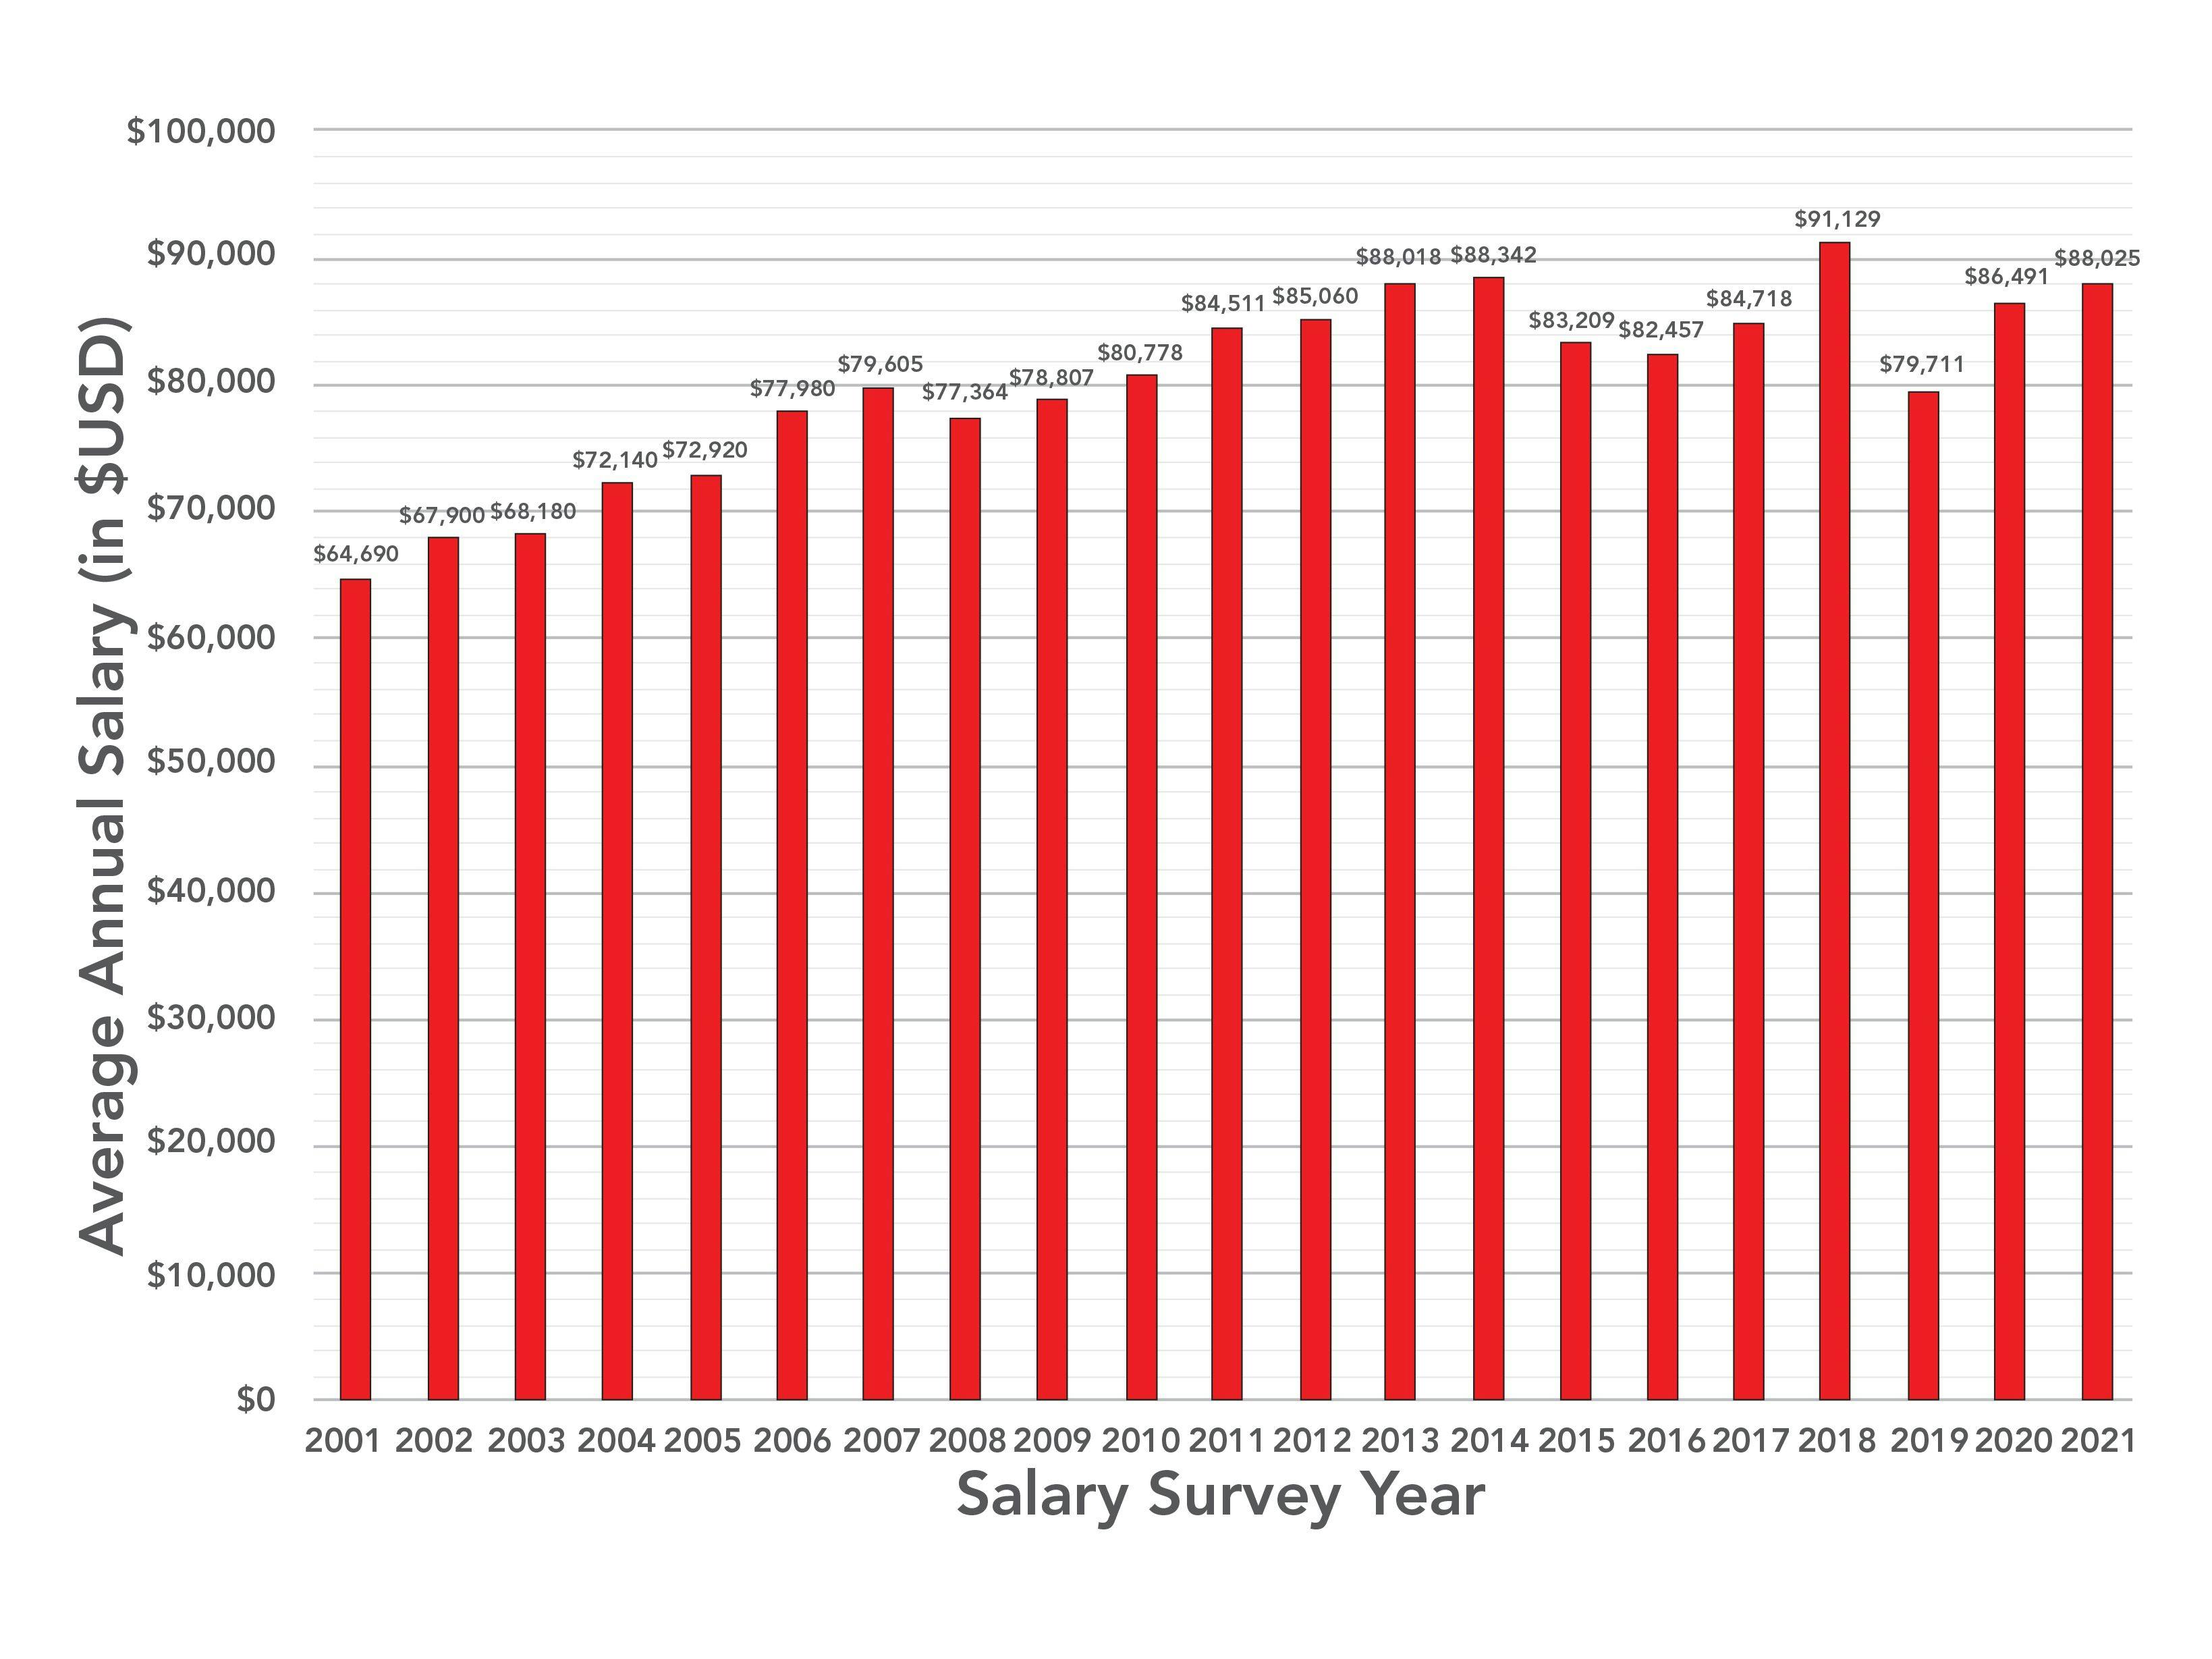 FIGURE 5: Reported average salaries for spectroscopy science professionals from 2001 through 2021 surveys (in $USD).